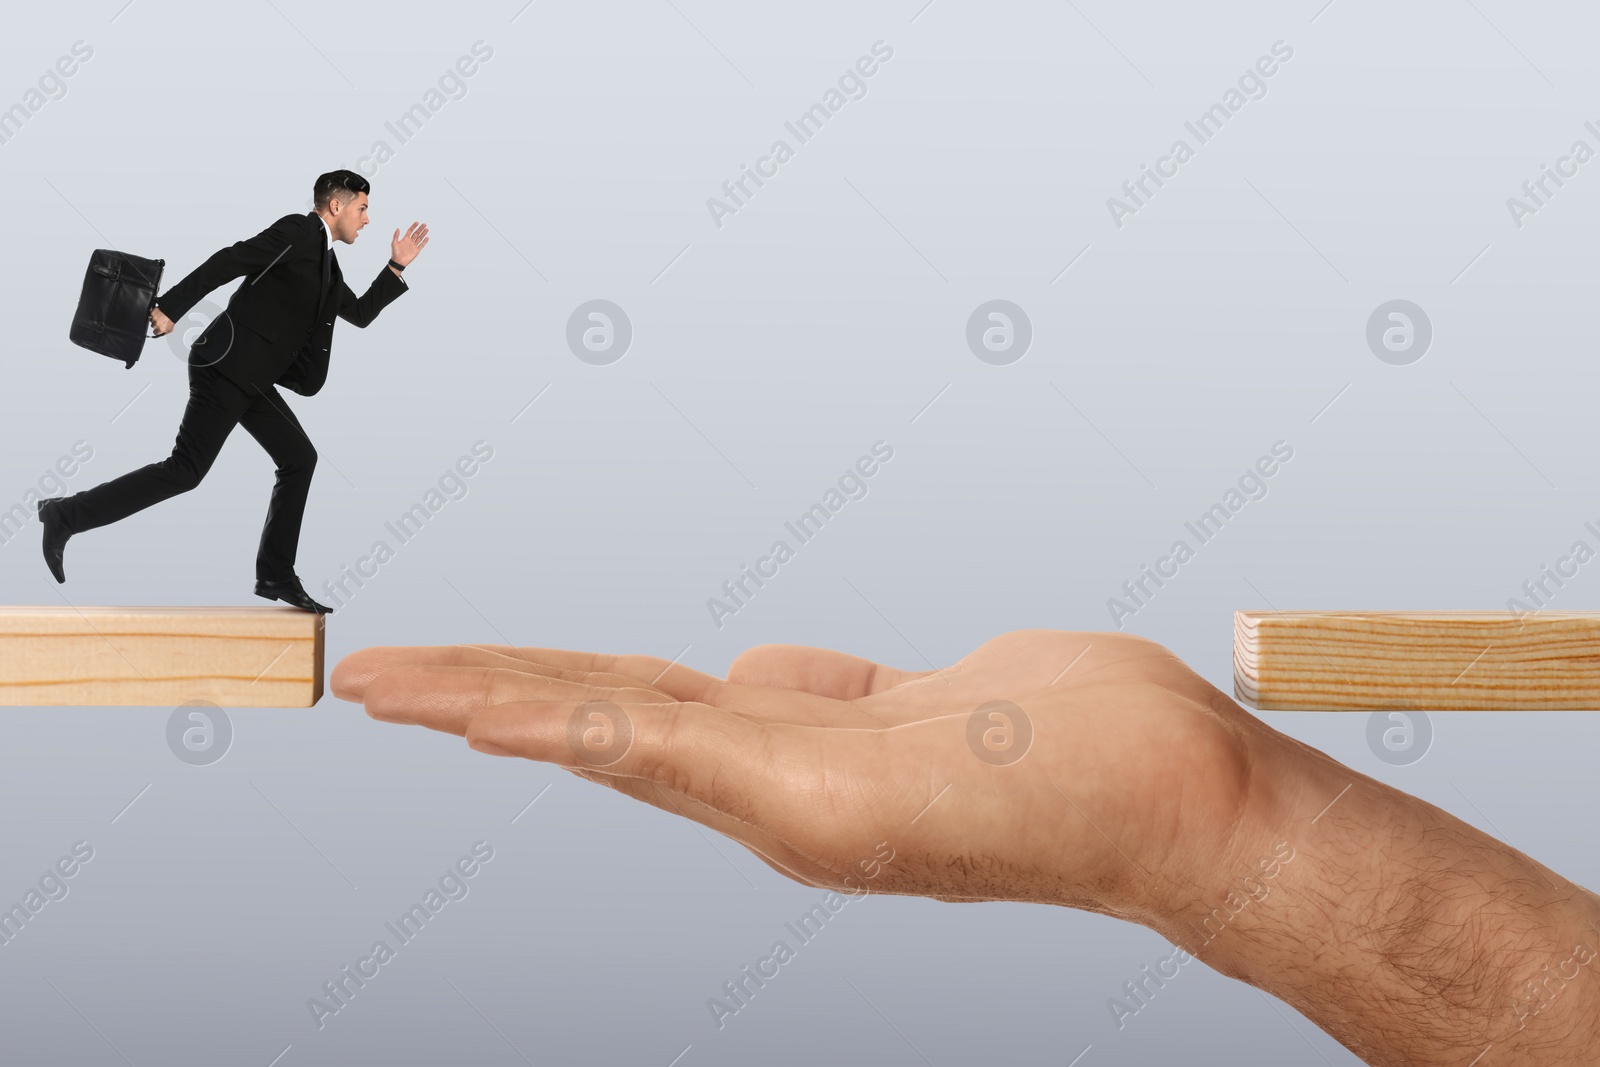 Image of Support or partnership concept. Man making bridge with his hand between wooden blocks to help running businessman